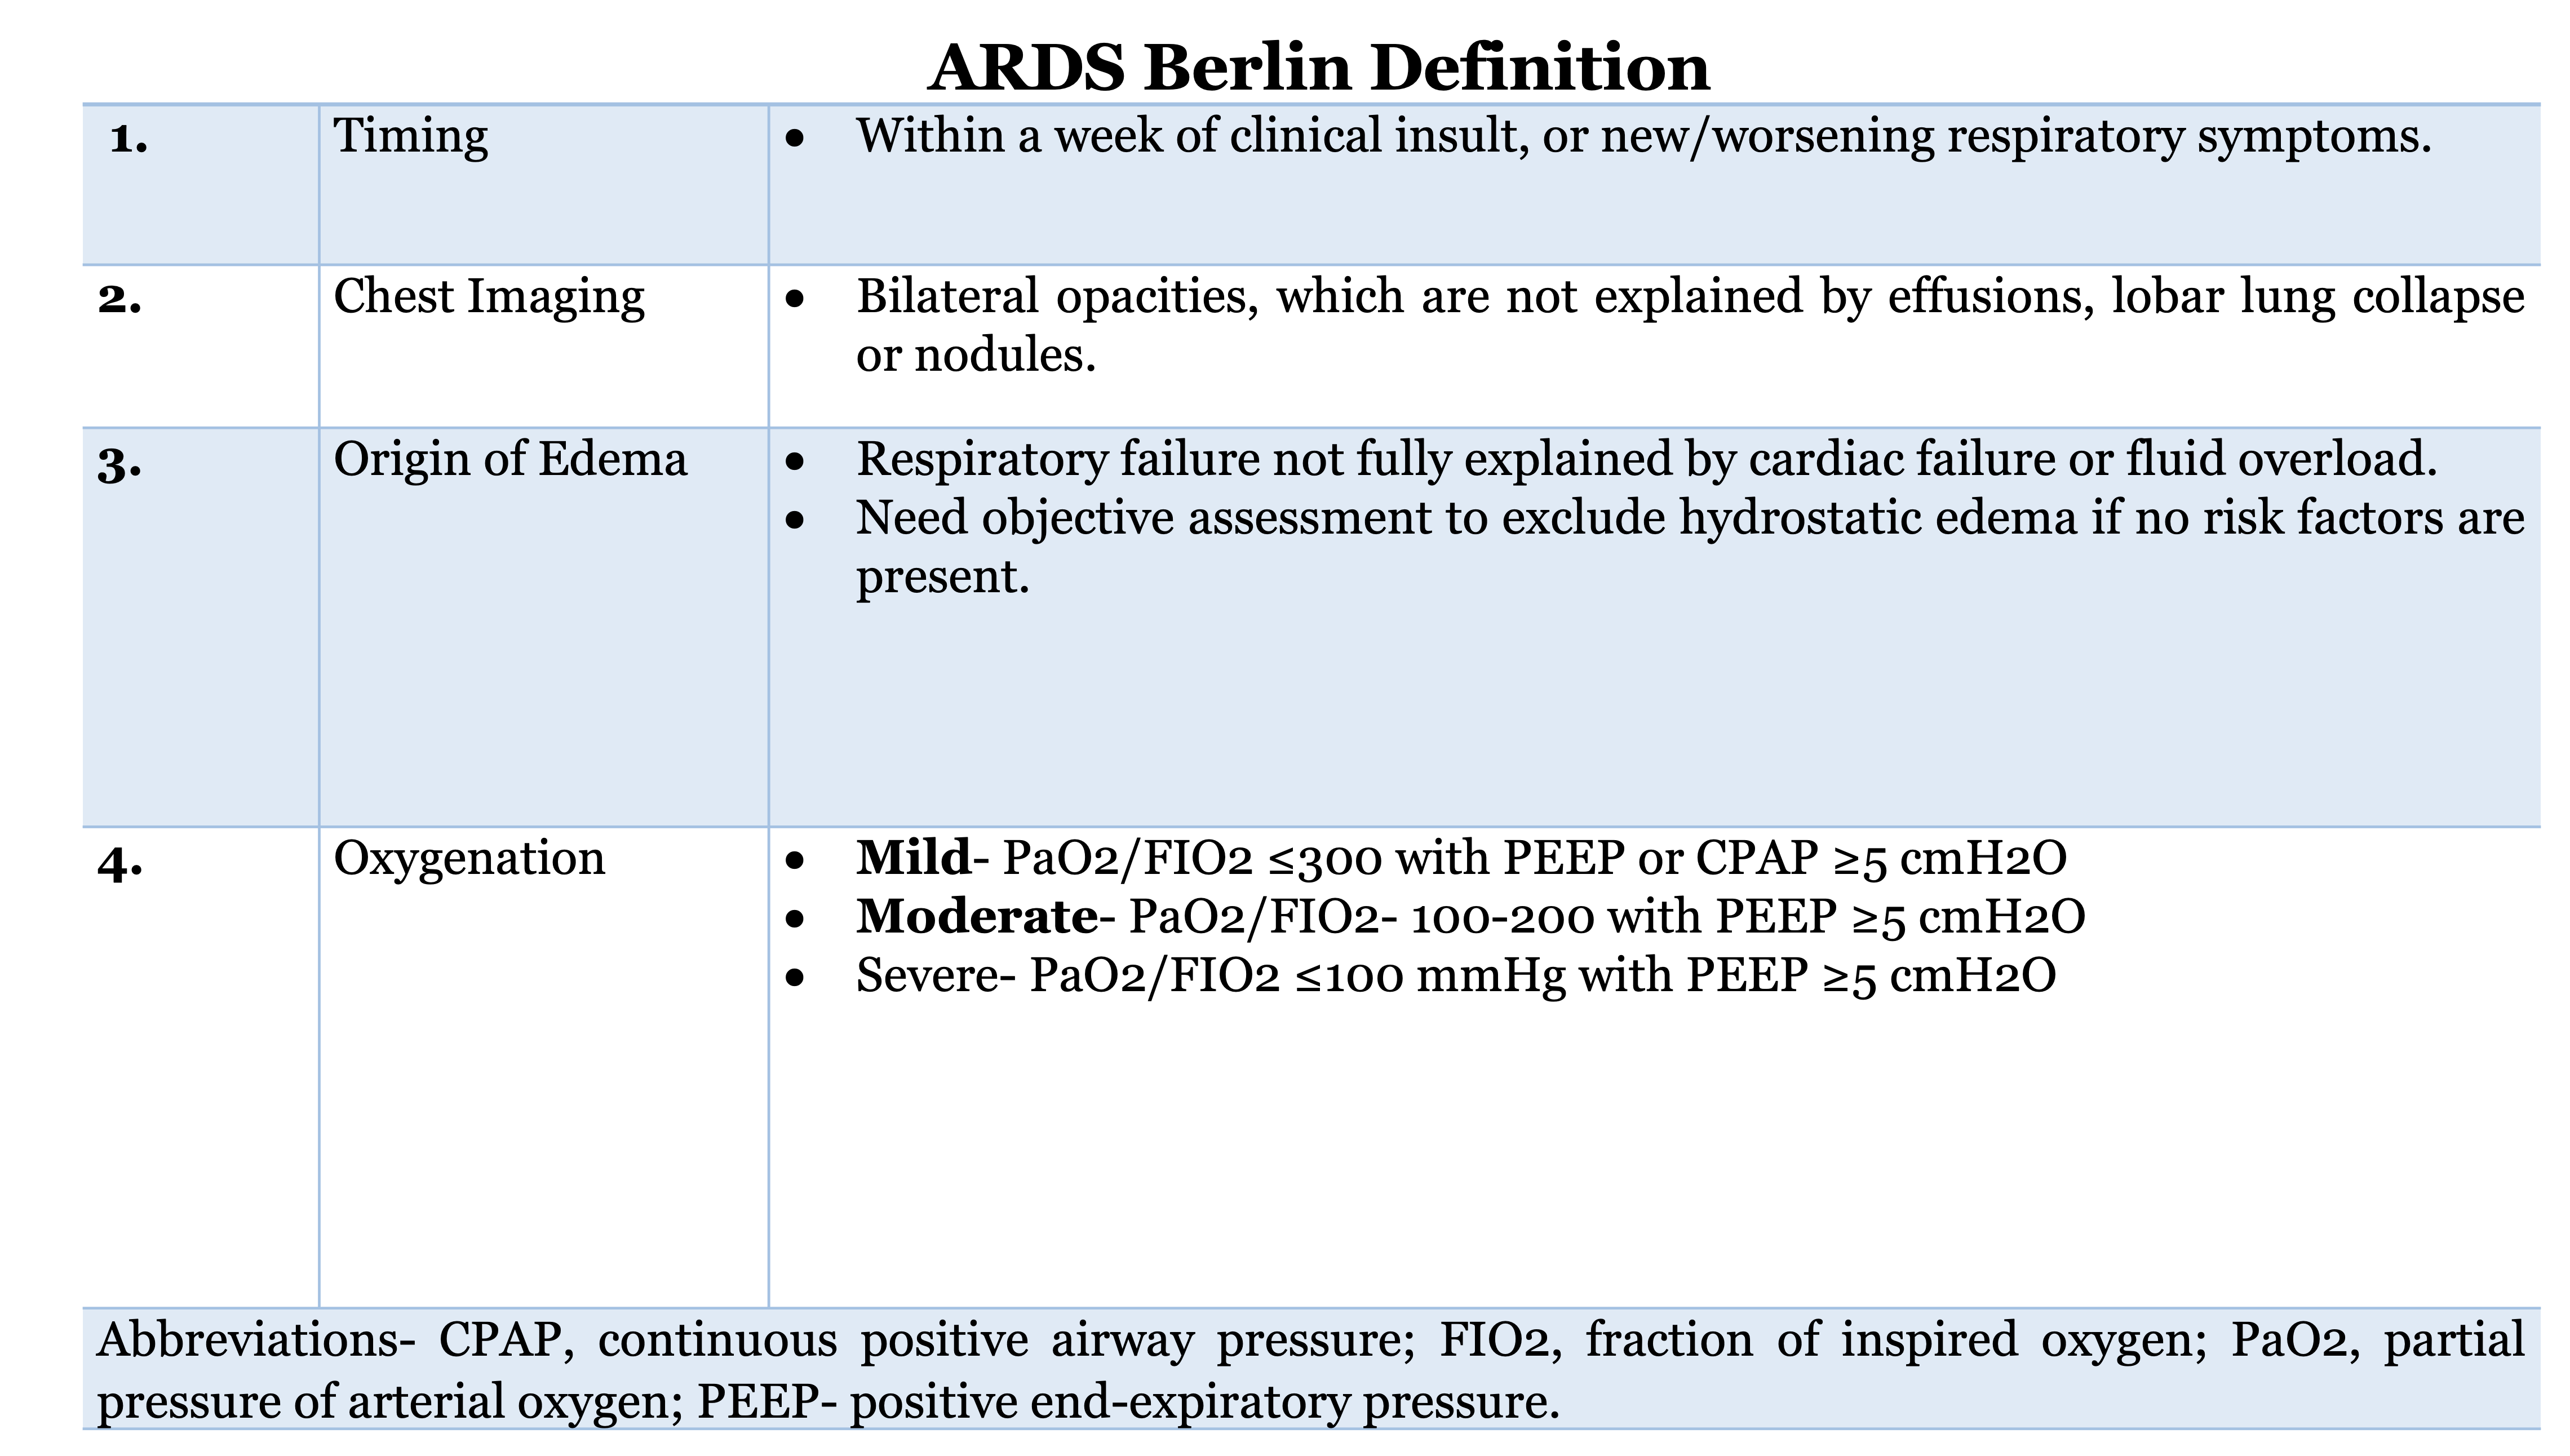 Figure 1: Depicting the Berlin Criteria for ARDS diagnosis and severity.